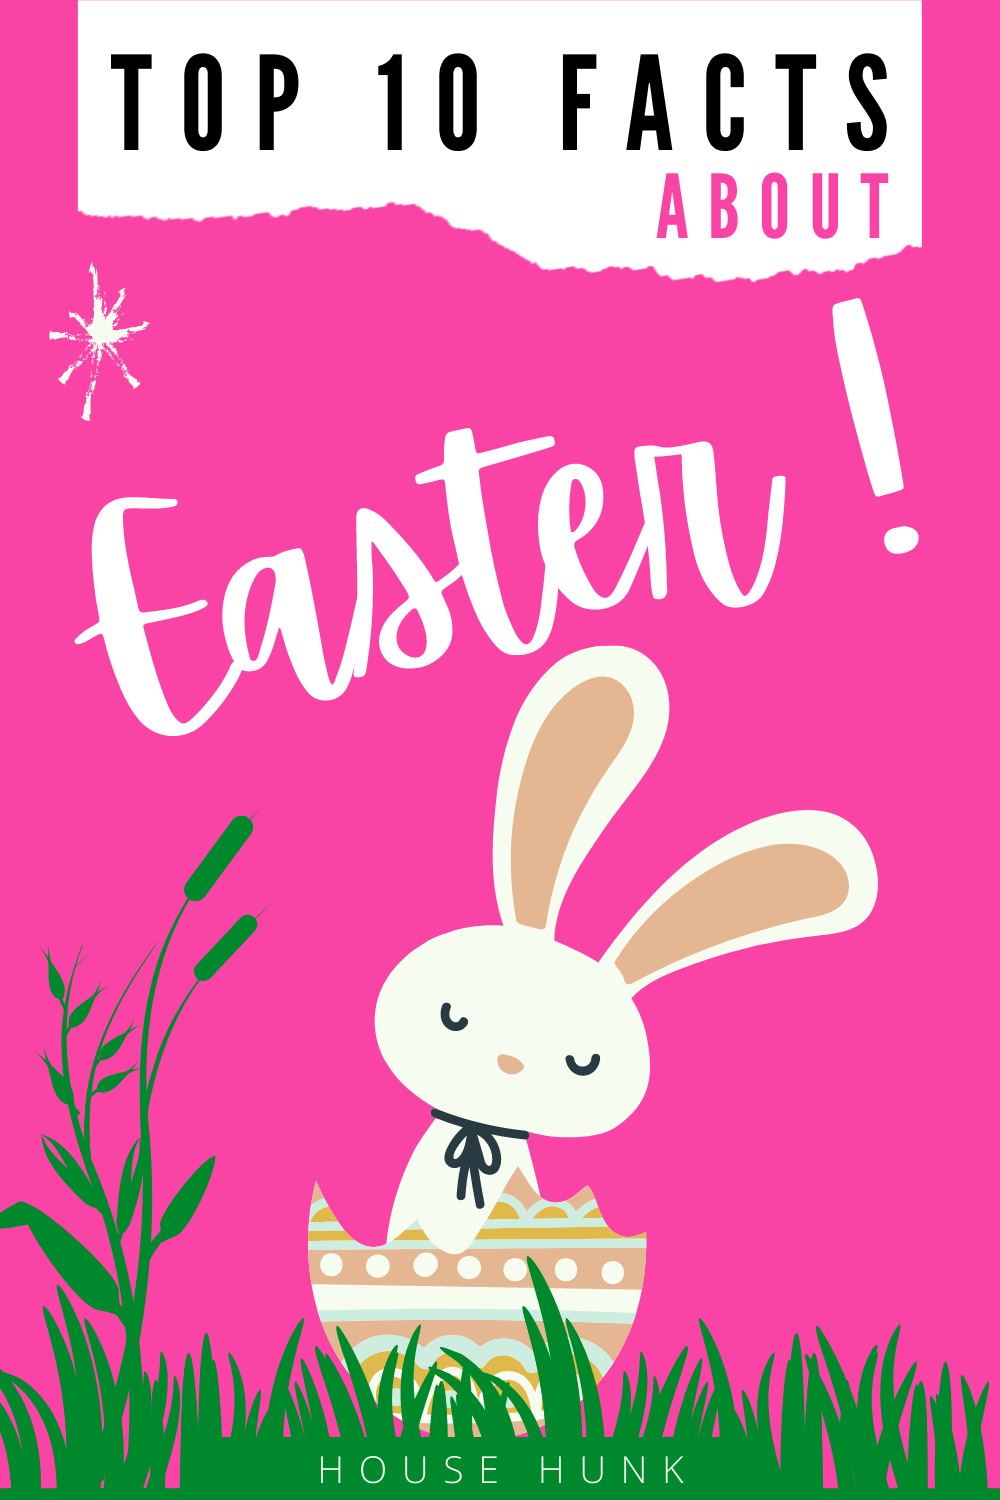 A poster with a pink background and white text that says Top 10 facts about Easter, with an illustration of a bunny in a basket.